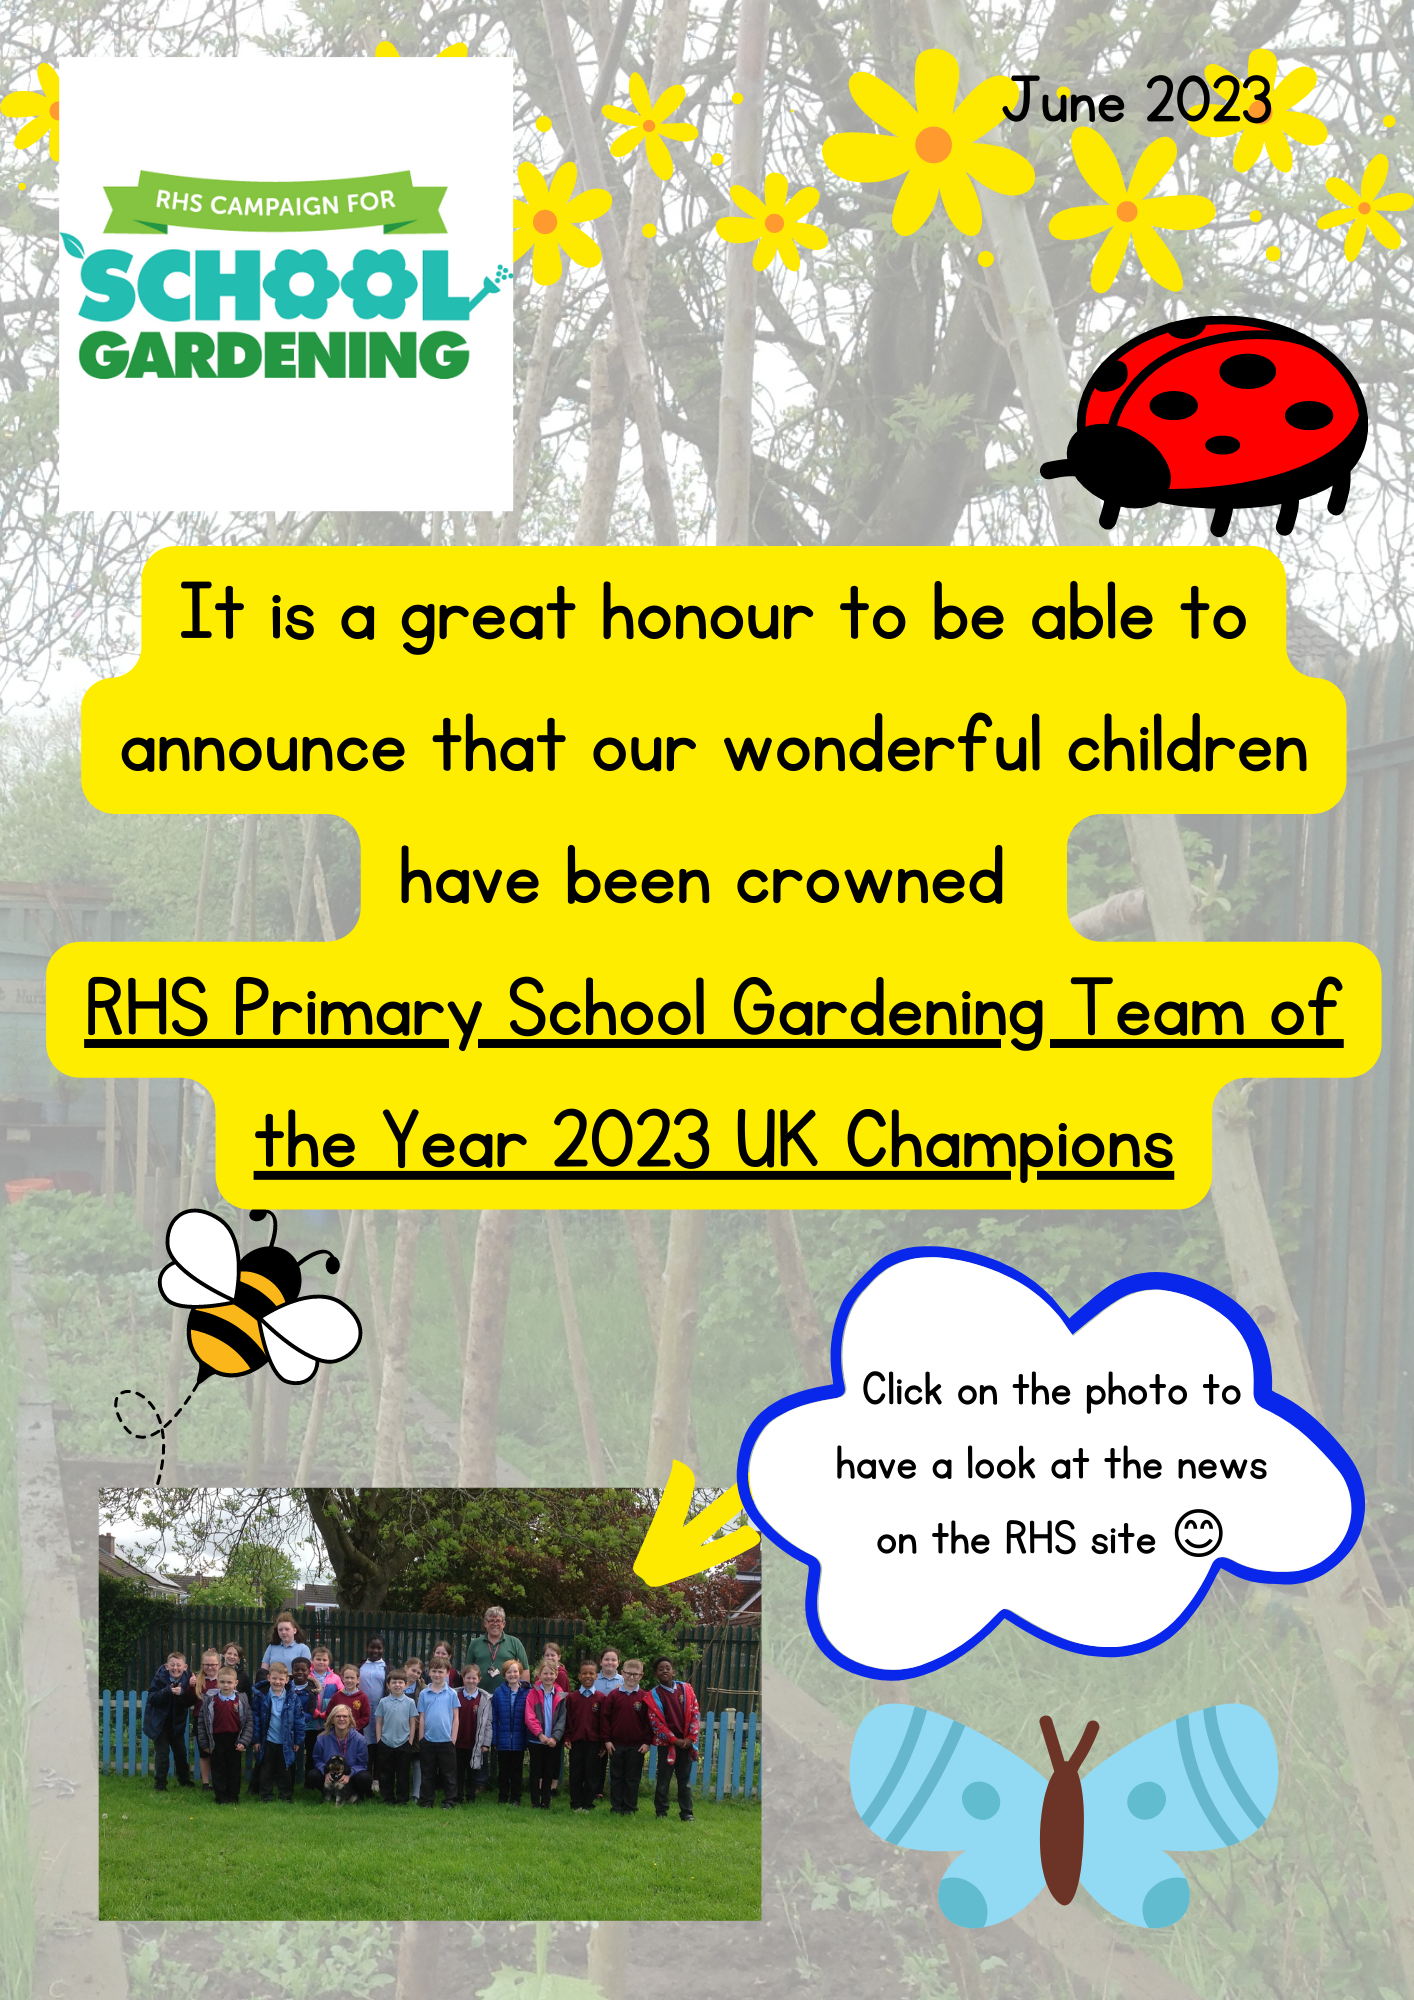 Trees - myths and folklore / RHS Campaign for School Gardening